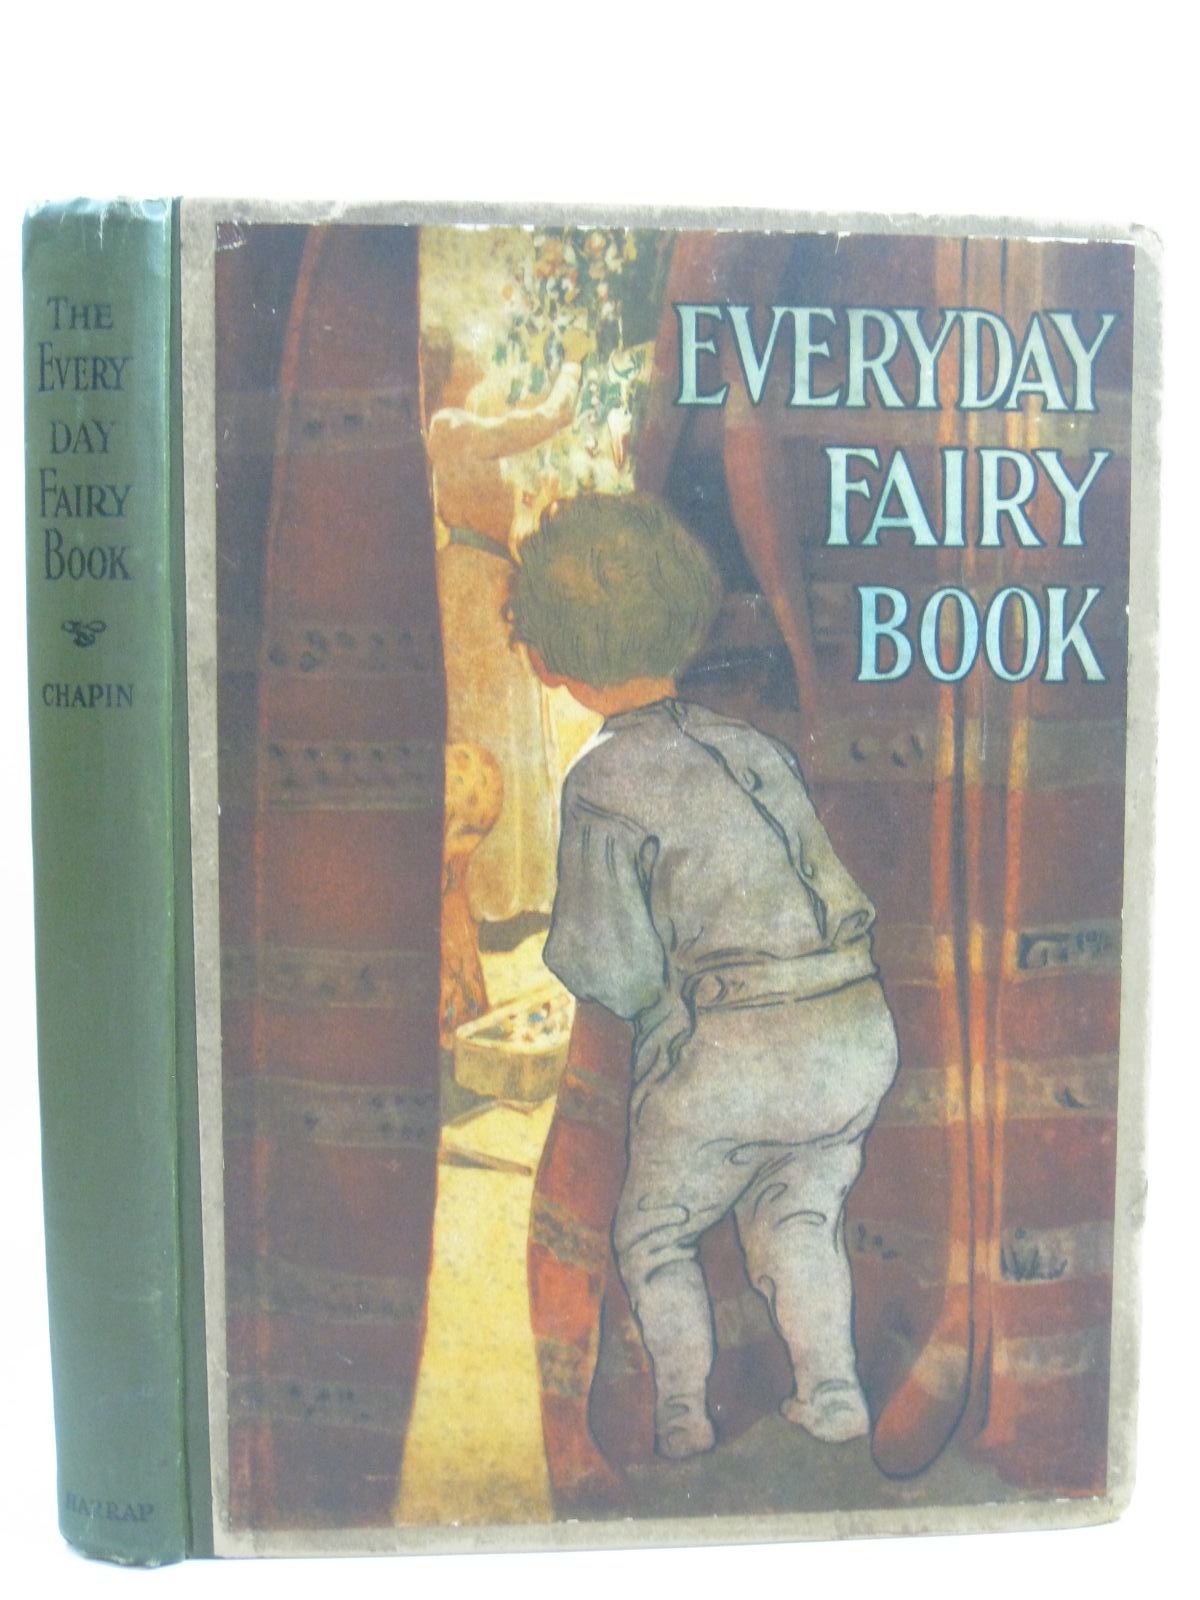 Photo of THE EVERYDAY FAIRY BOOK written by Chapin, Anna Alice illustrated by Smith, Jessie Willcox published by George G. Harrap & Co. Ltd. (STOCK CODE: 1405361)  for sale by Stella & Rose's Books